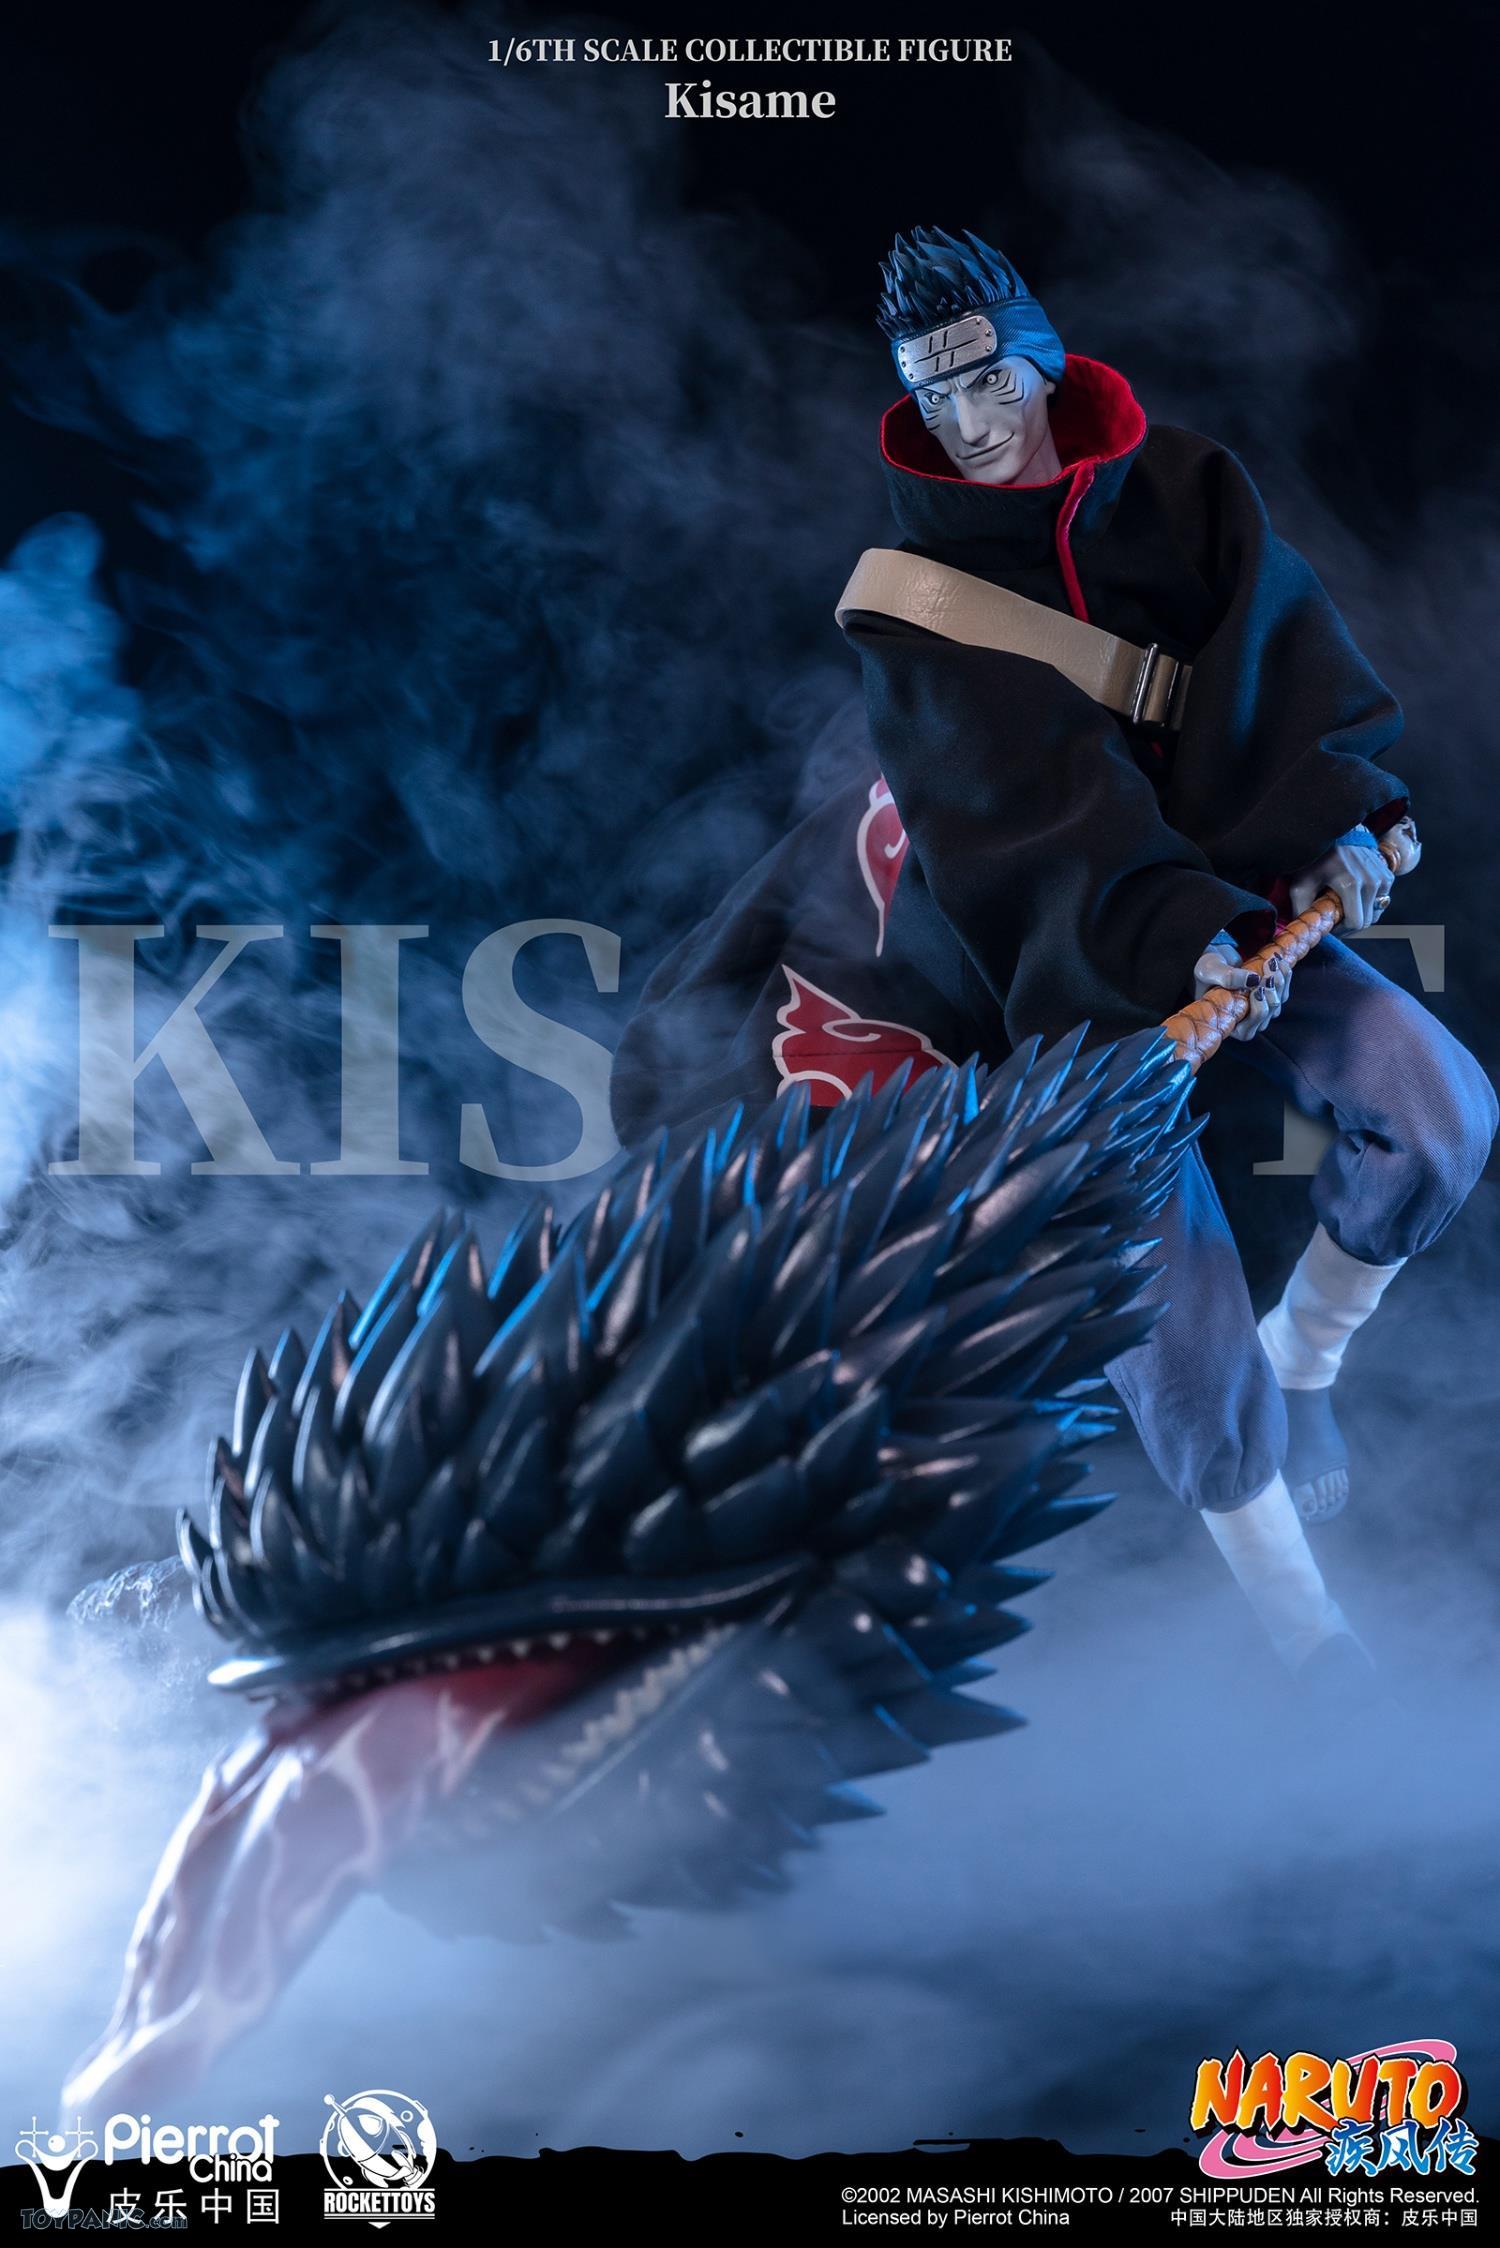 pierrot - NEW PRODUCT: Rocket Toys ROC-007 1/6 Scale Kisame 221202460435PM_1782184